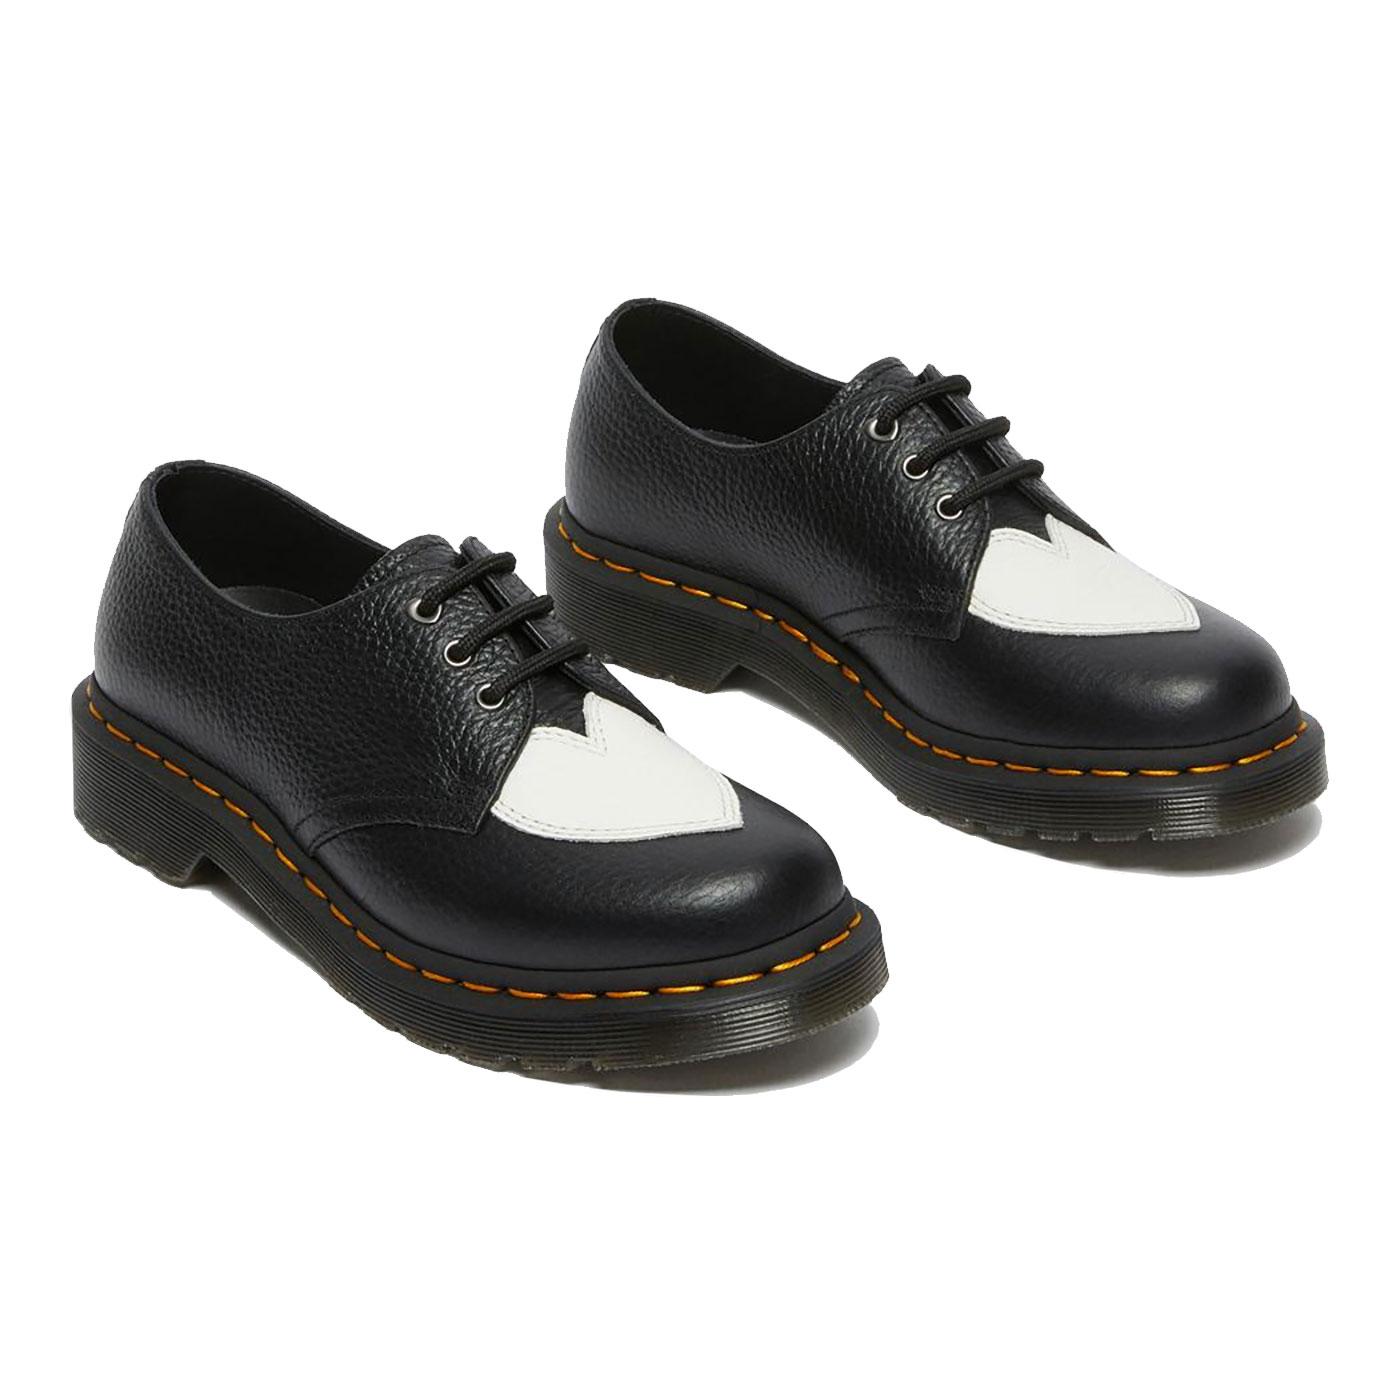 DR MARTENS '1461 Amore' Oxford Shoes in Black & White